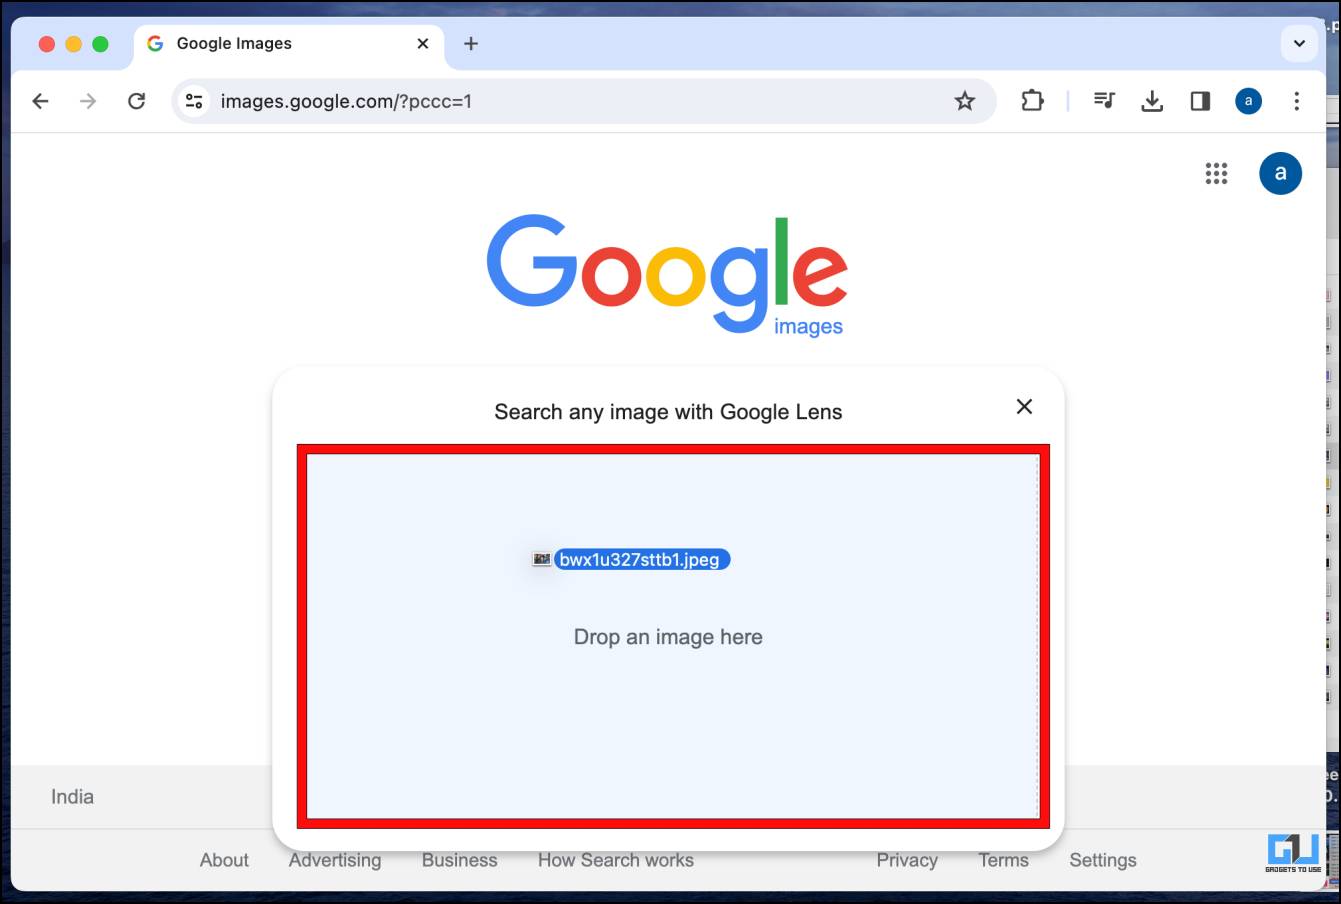 Dragging and Dropping Images to Reverse Search them On Google